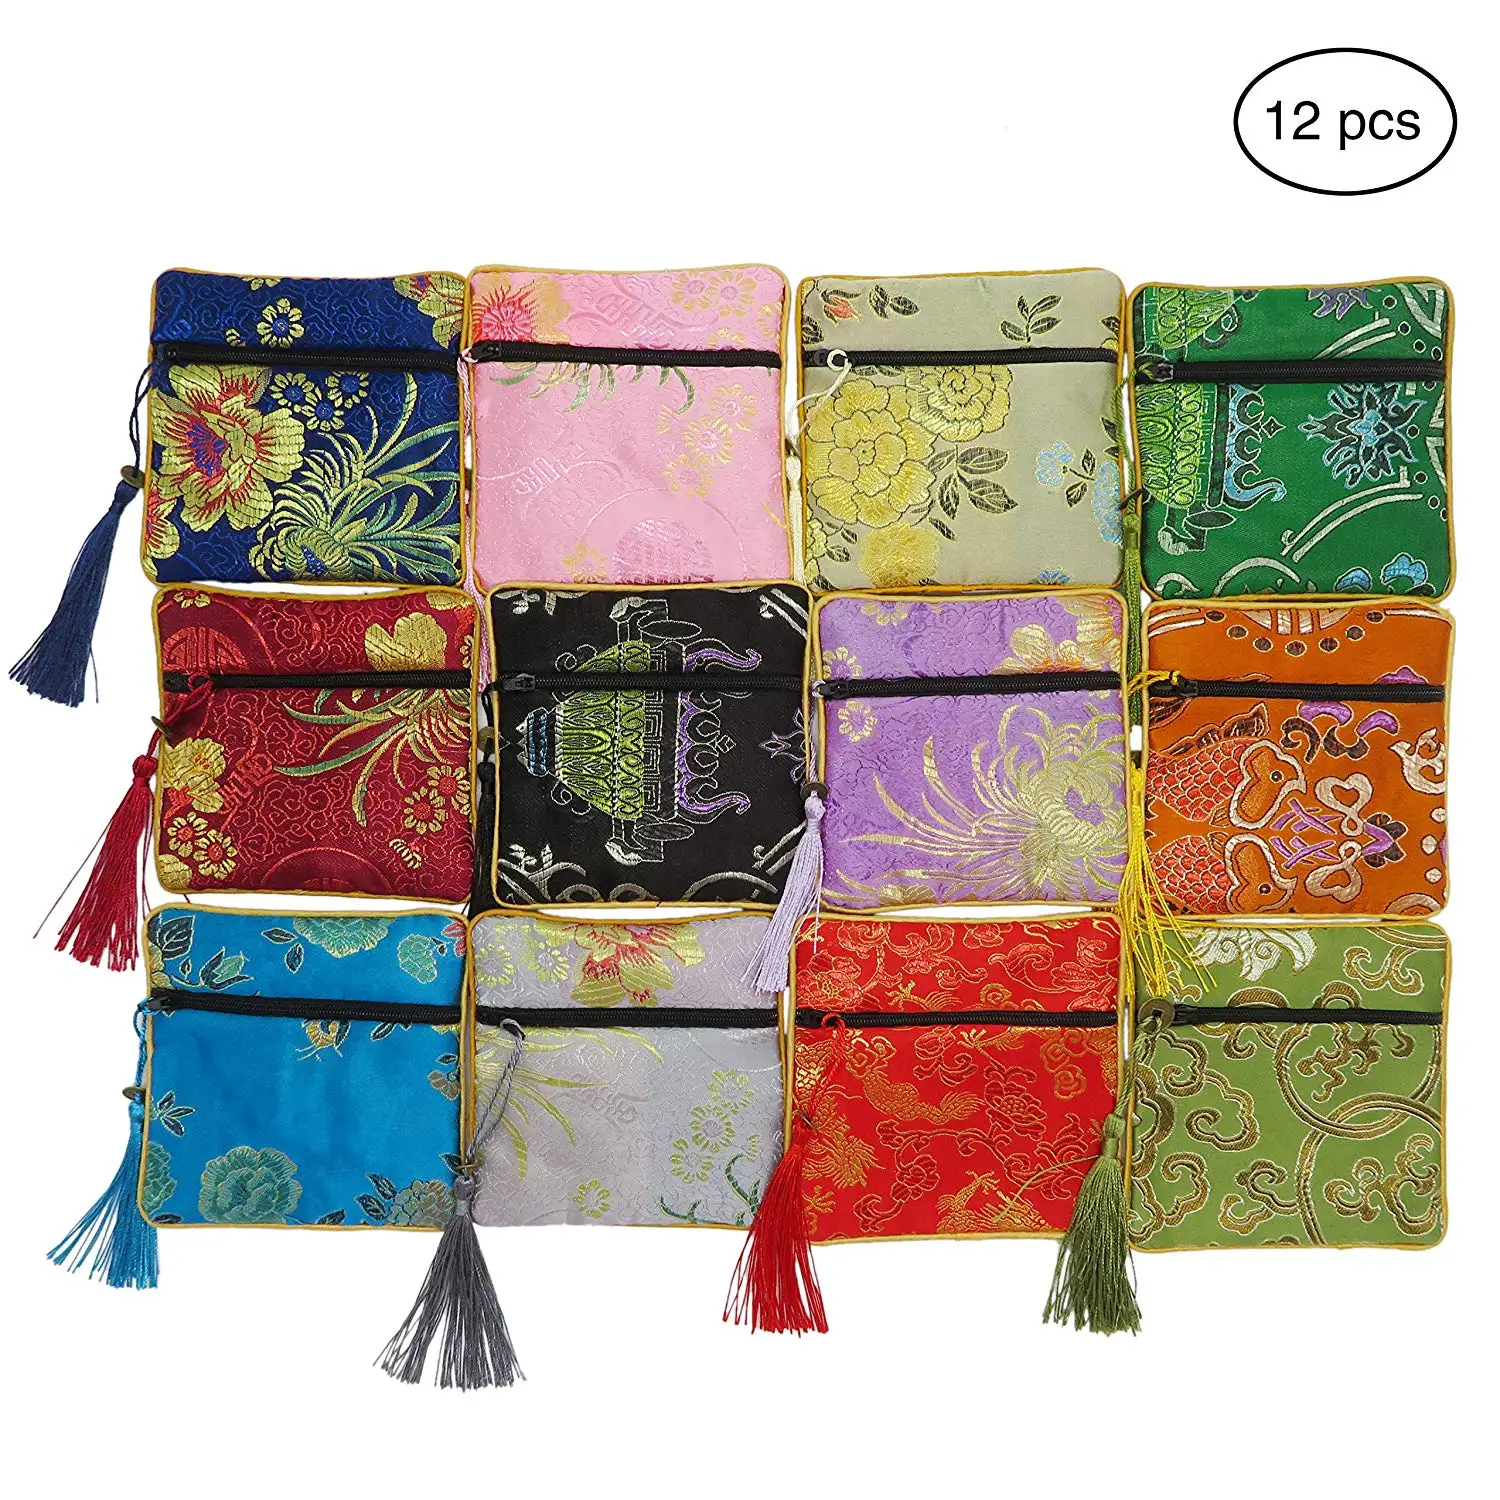 Details about   12 Pieces Jewelry Silk Purse Pouch Chinese Embroidered Brocade Zipper Gift pack 